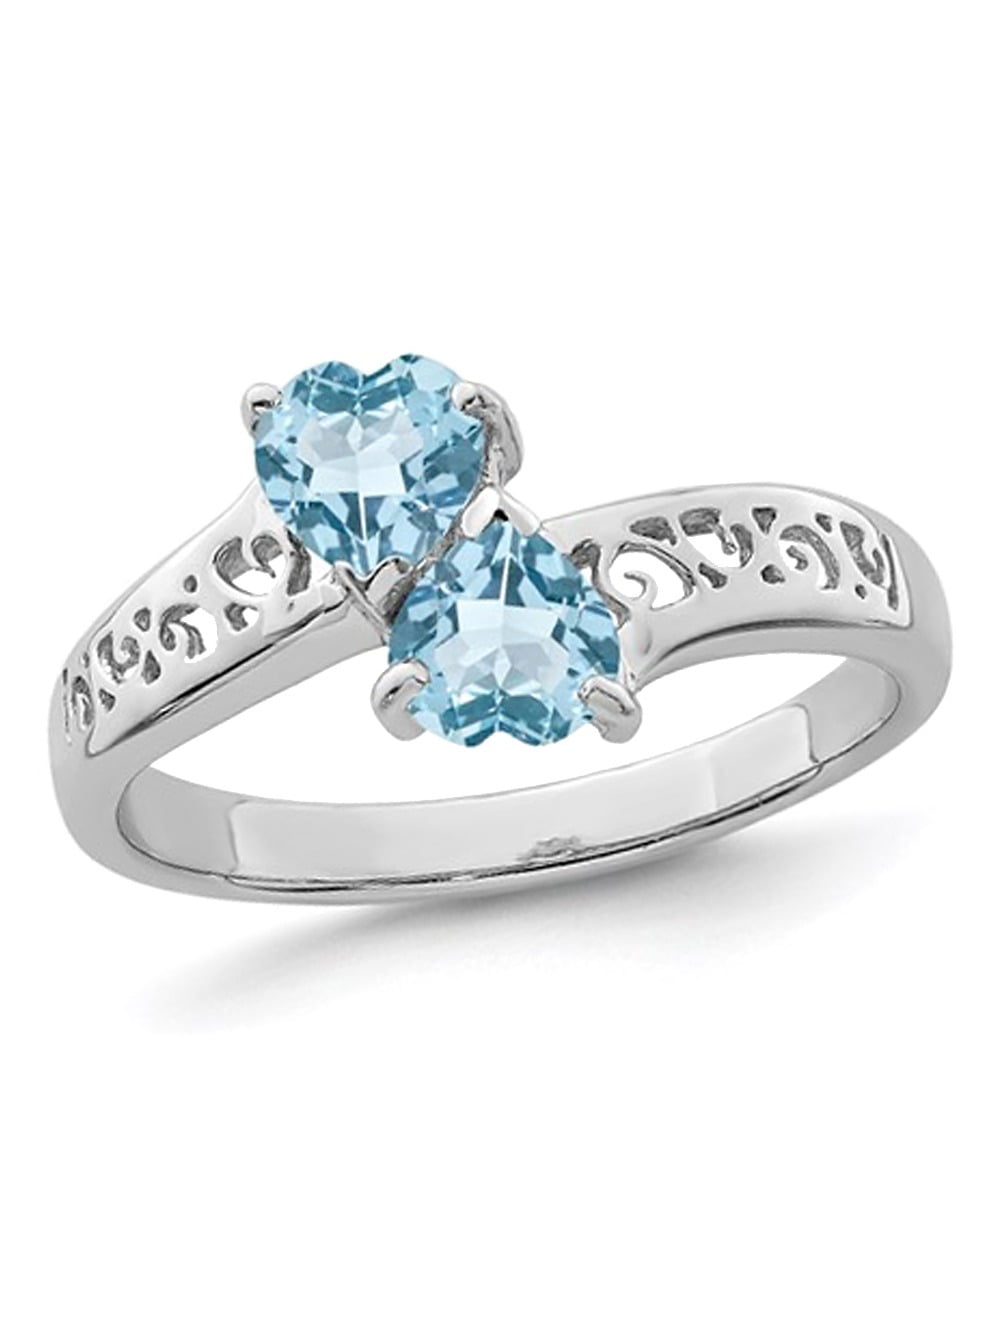 STERLING SILVER SWISS BLUE TOPAZ WITH DIAMOND ACCENTS HEART  RING SIZE 7